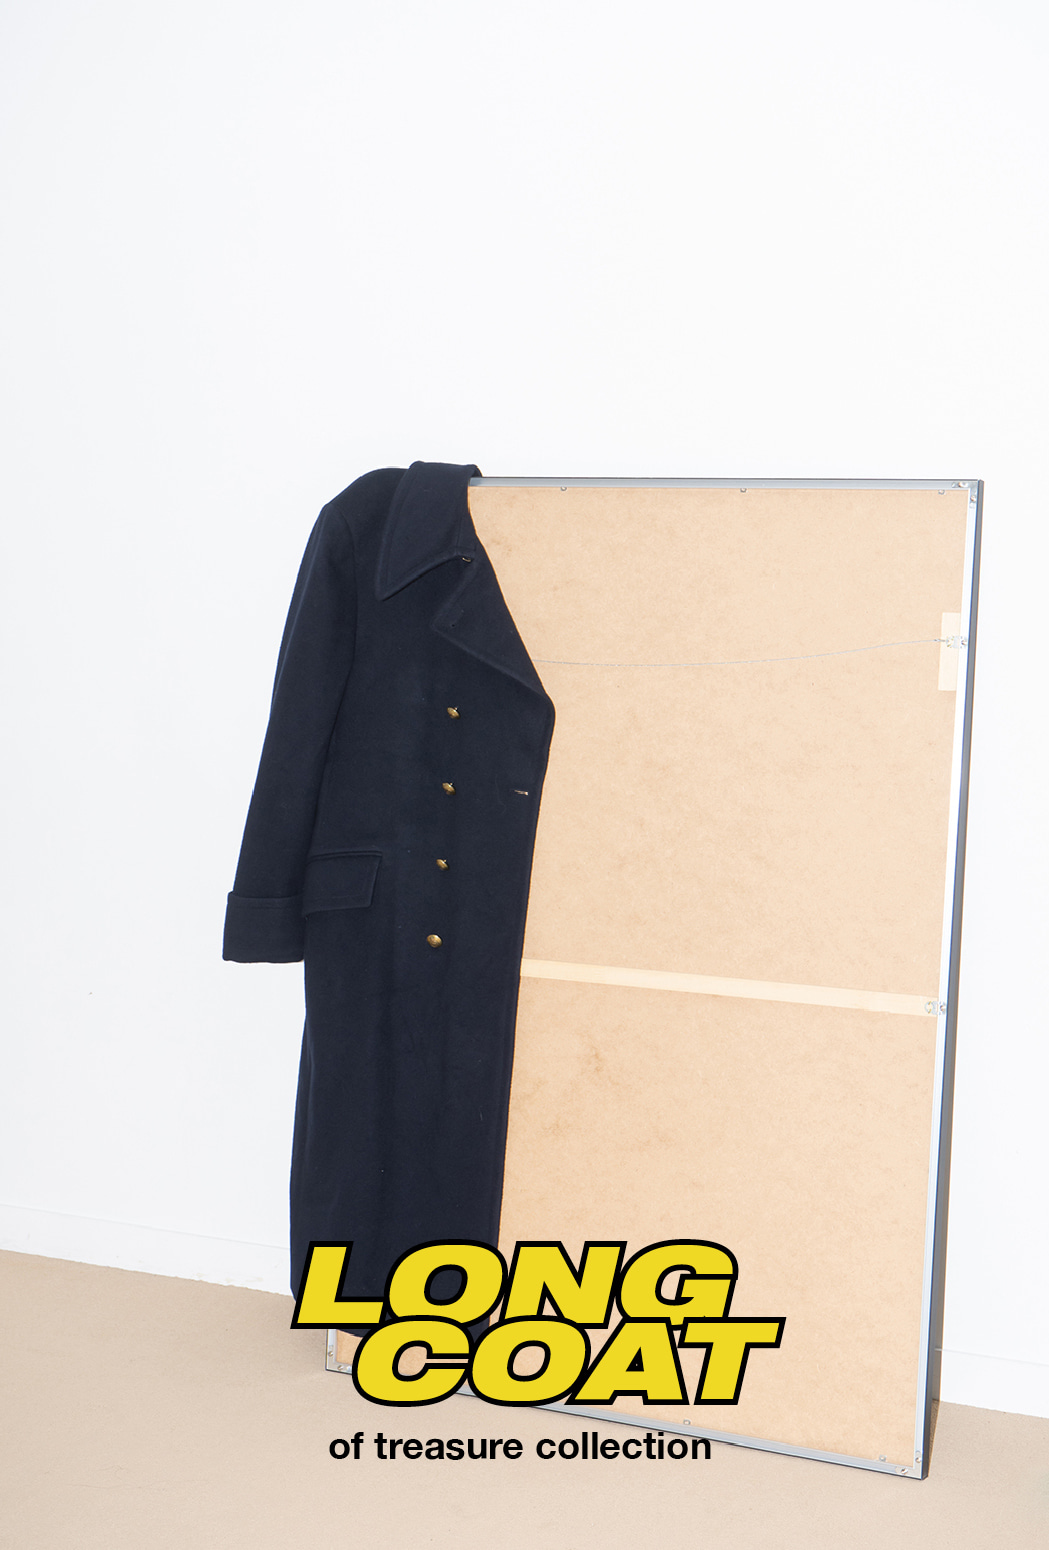 LONG COAT of treasure collection